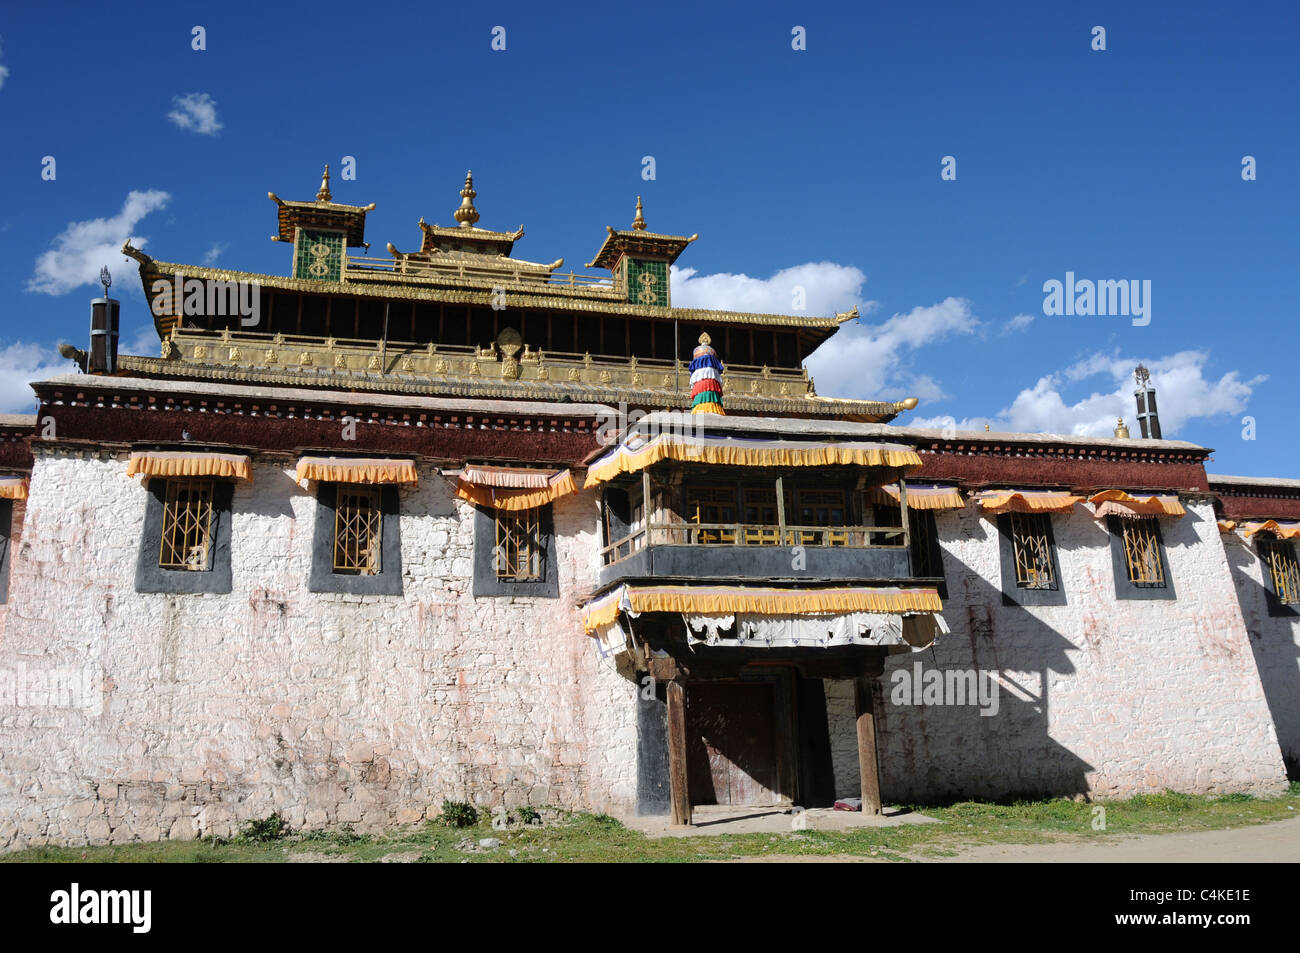 Scenery of a famous lamasery in Tibet. Stock Photo